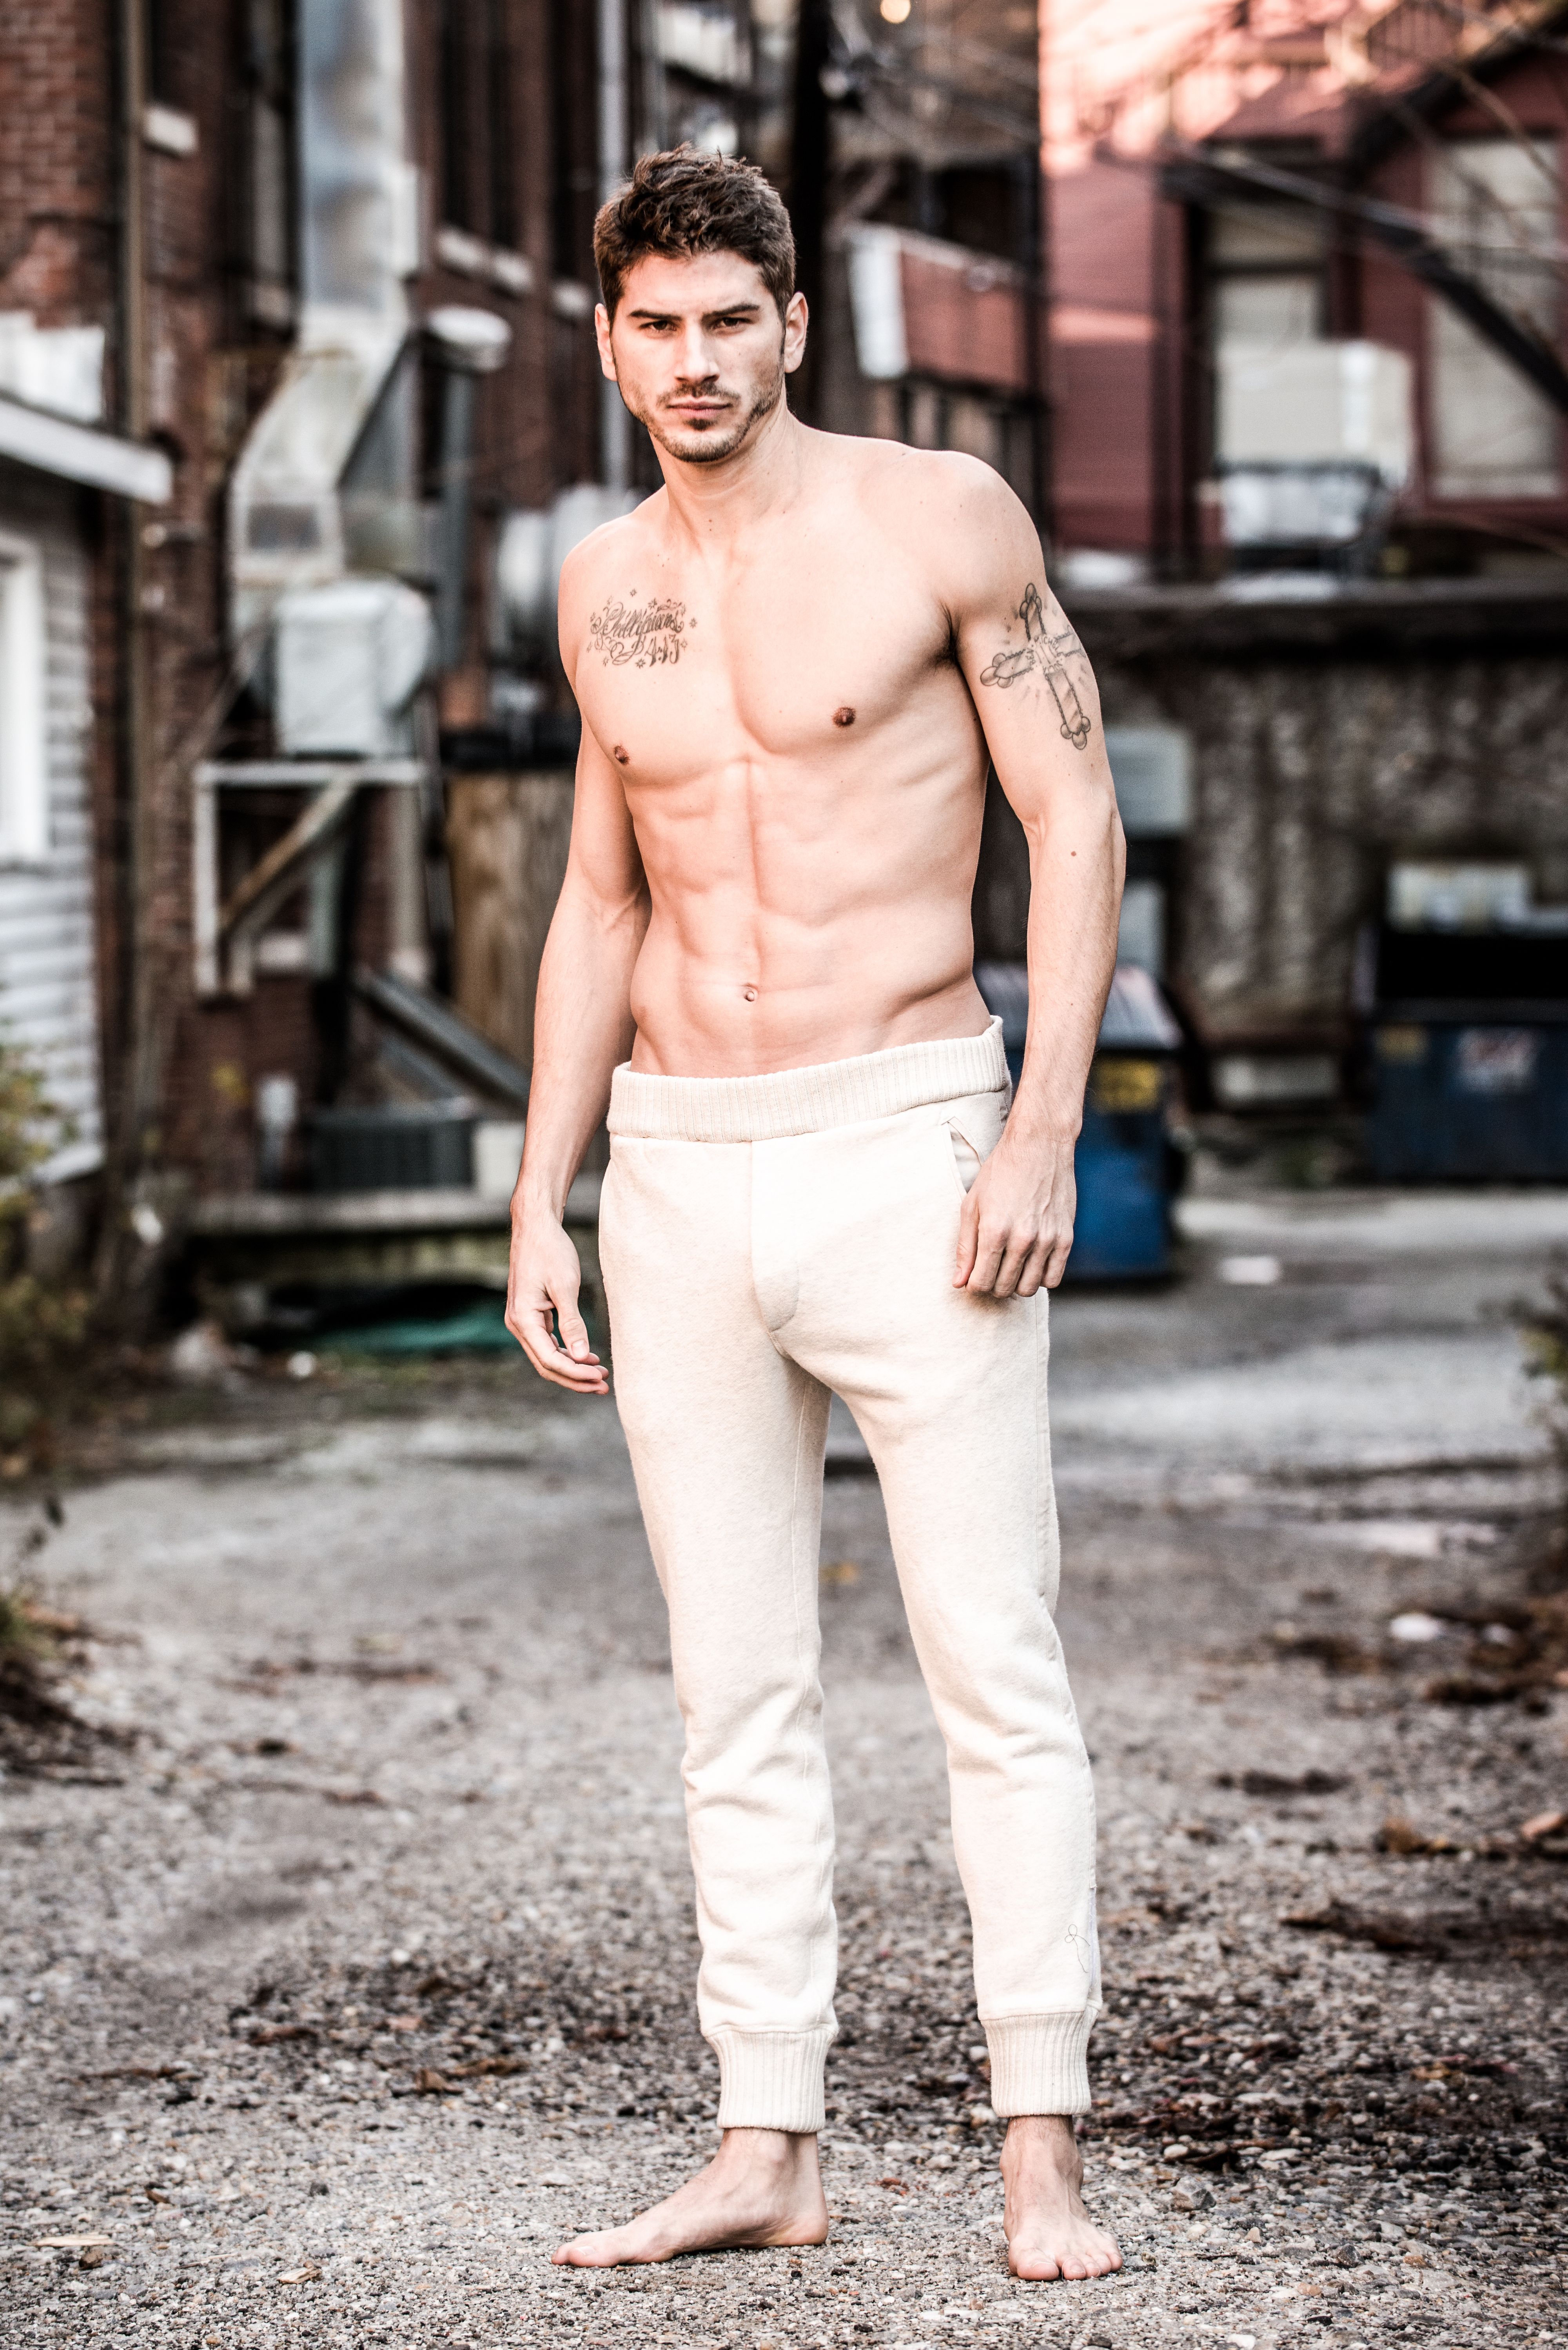 Shirtless and shoeless male model with tattoos and white pants standing in alleyway